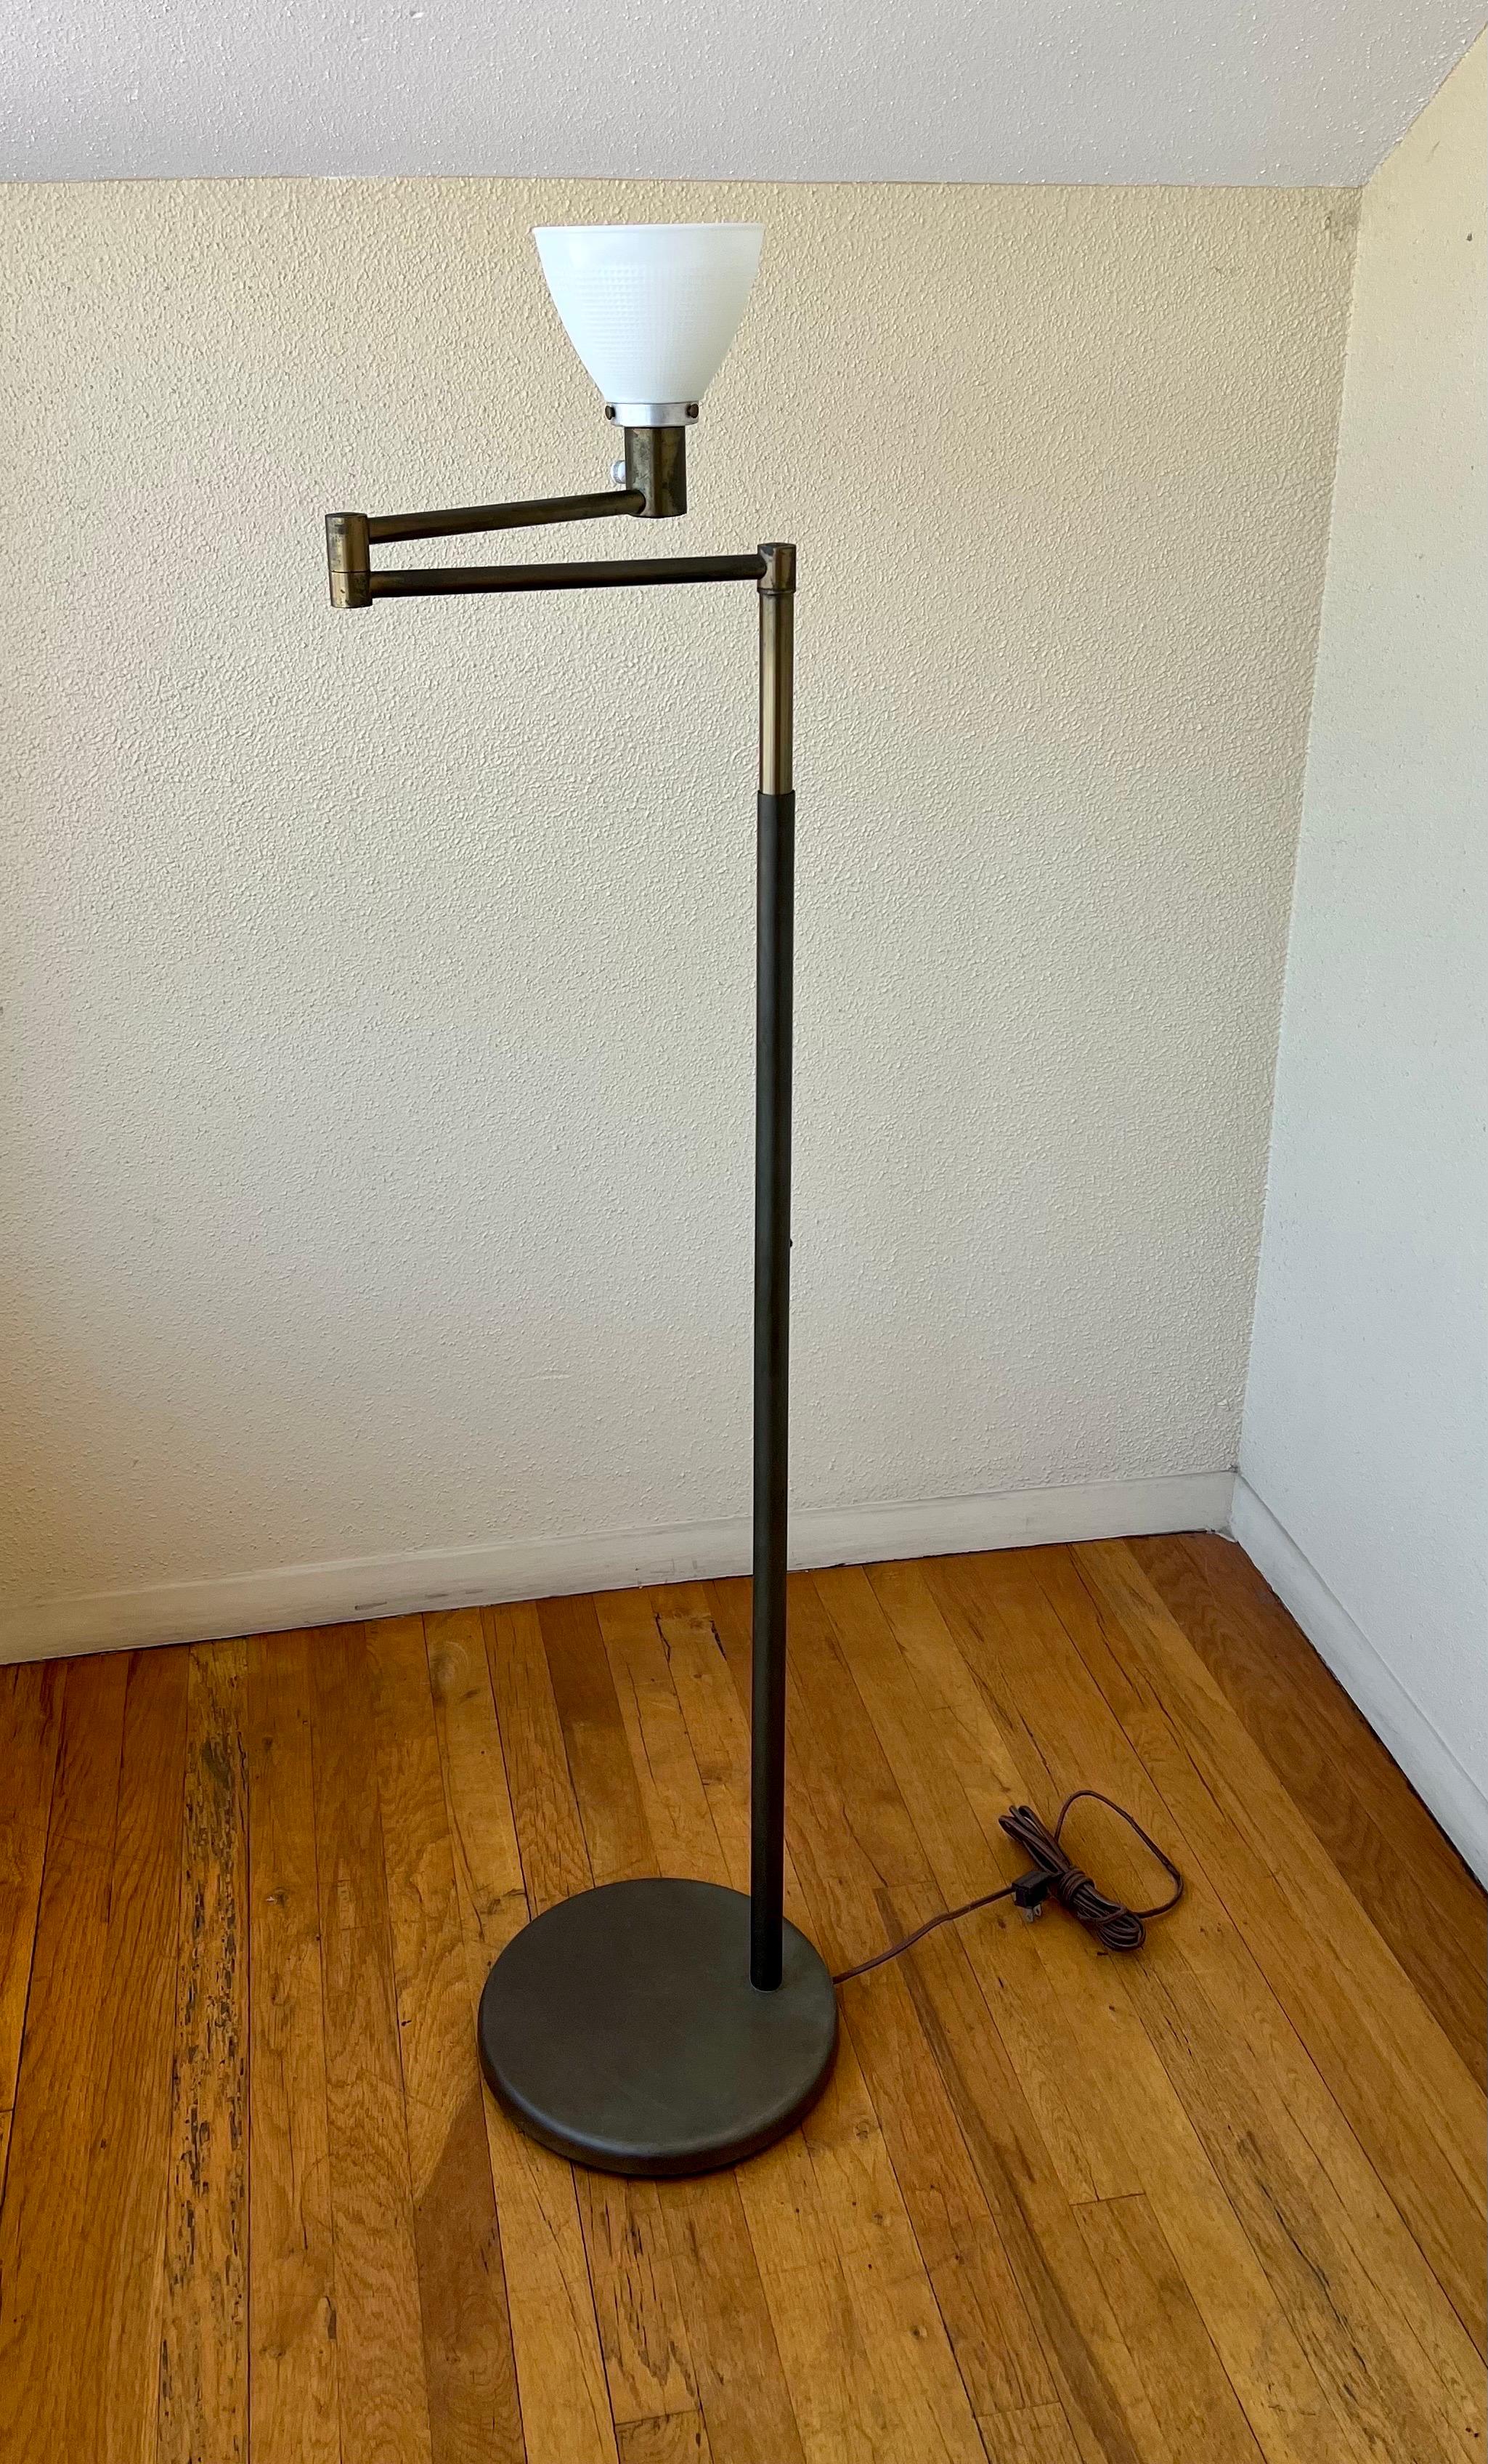 Early production on this floor lamp design by Walter Von Nessen for Nessen Studios, in brushed brass finish, great patina the arm moves back and forward and the pole goes up and down comes with the original lampshade that has been redone and plastic